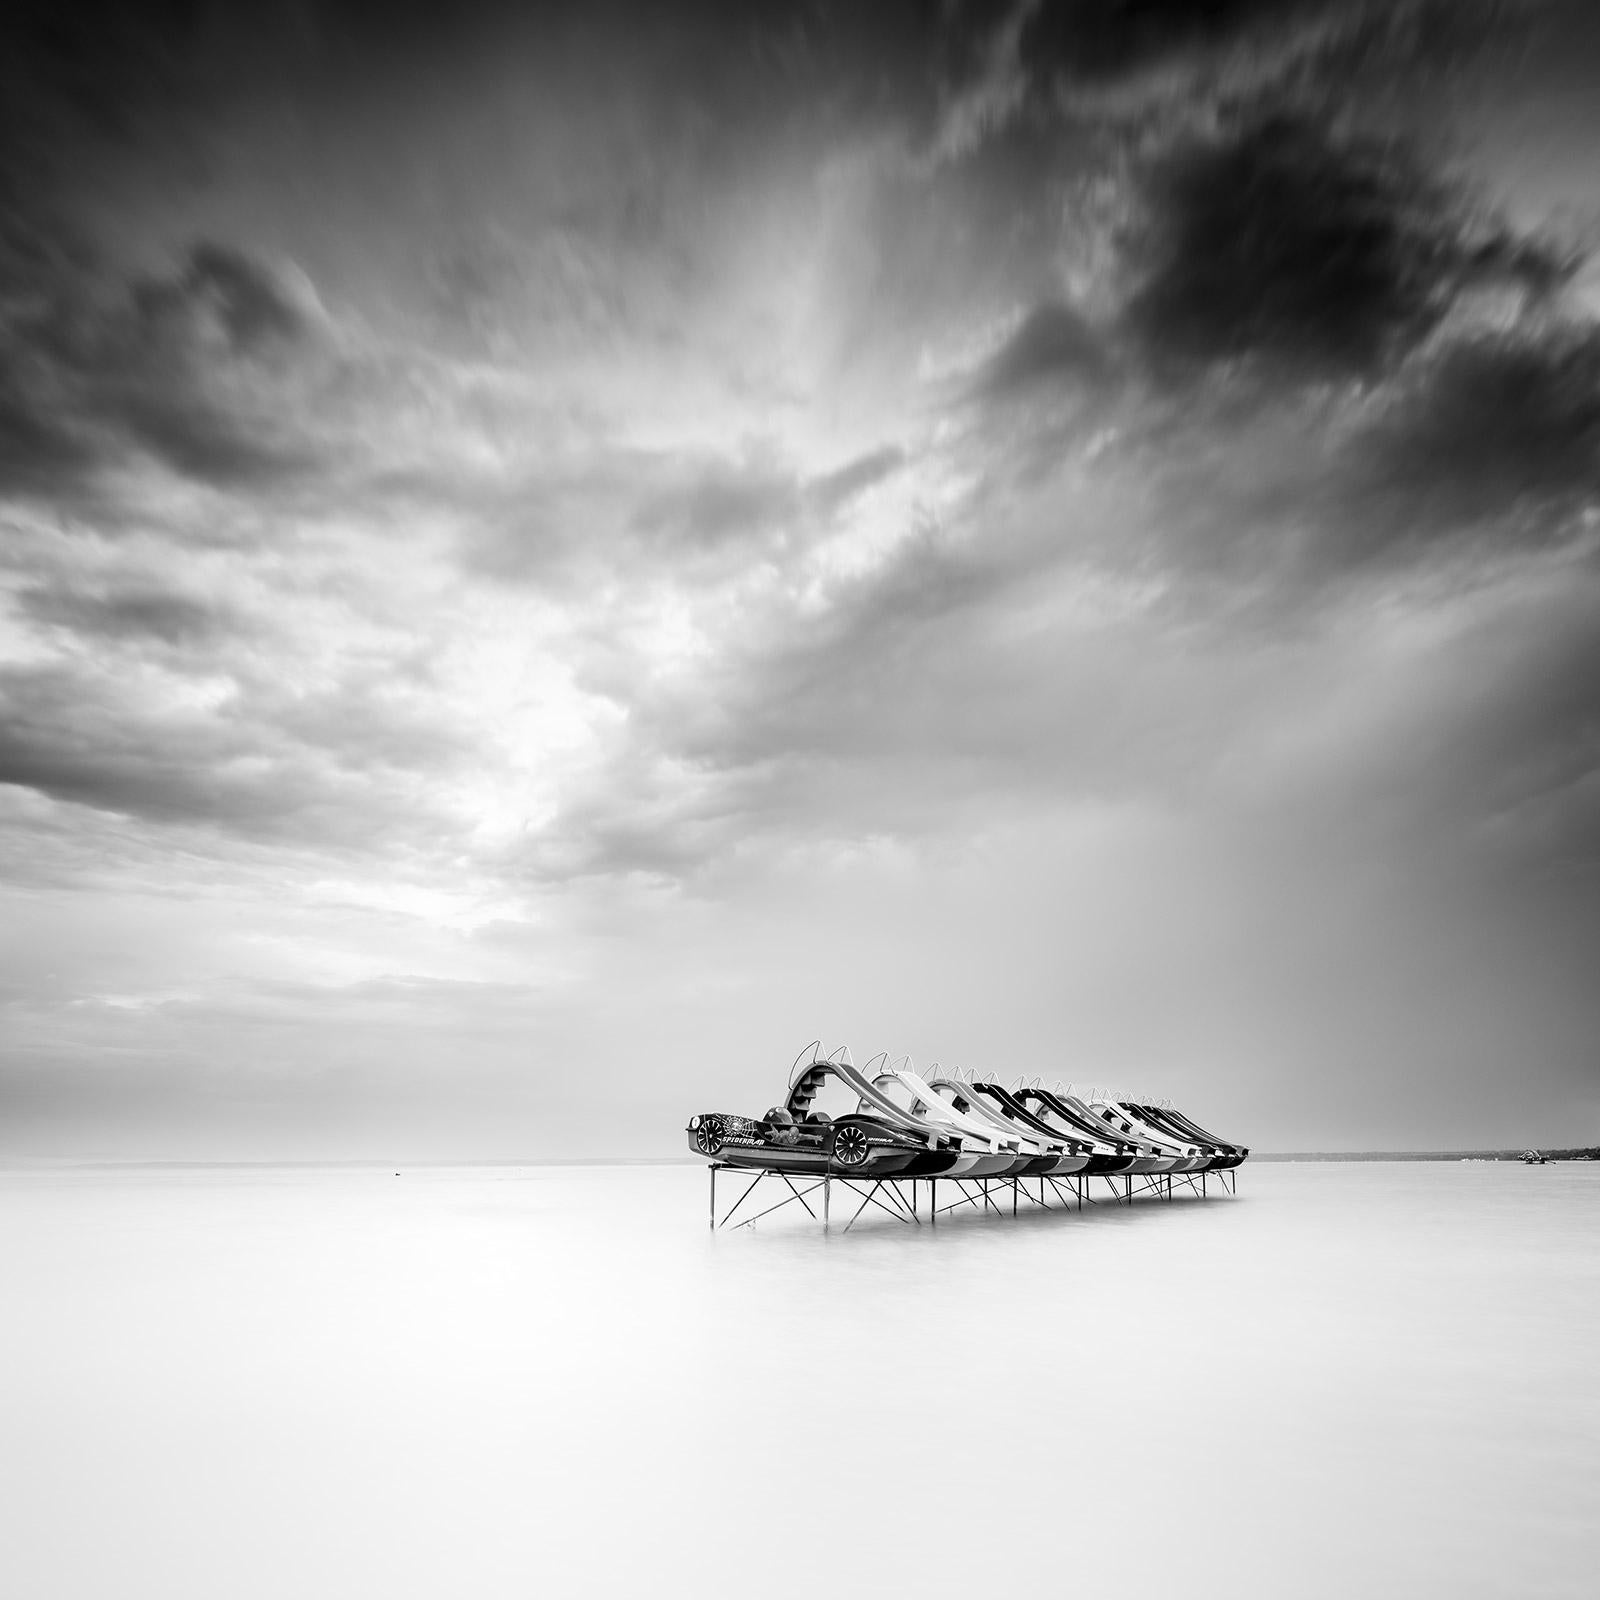 Gerald Berghammer Black and White Photograph - Pedal Boat, storm, Balaton, Hungary, black and white lakescape art photography